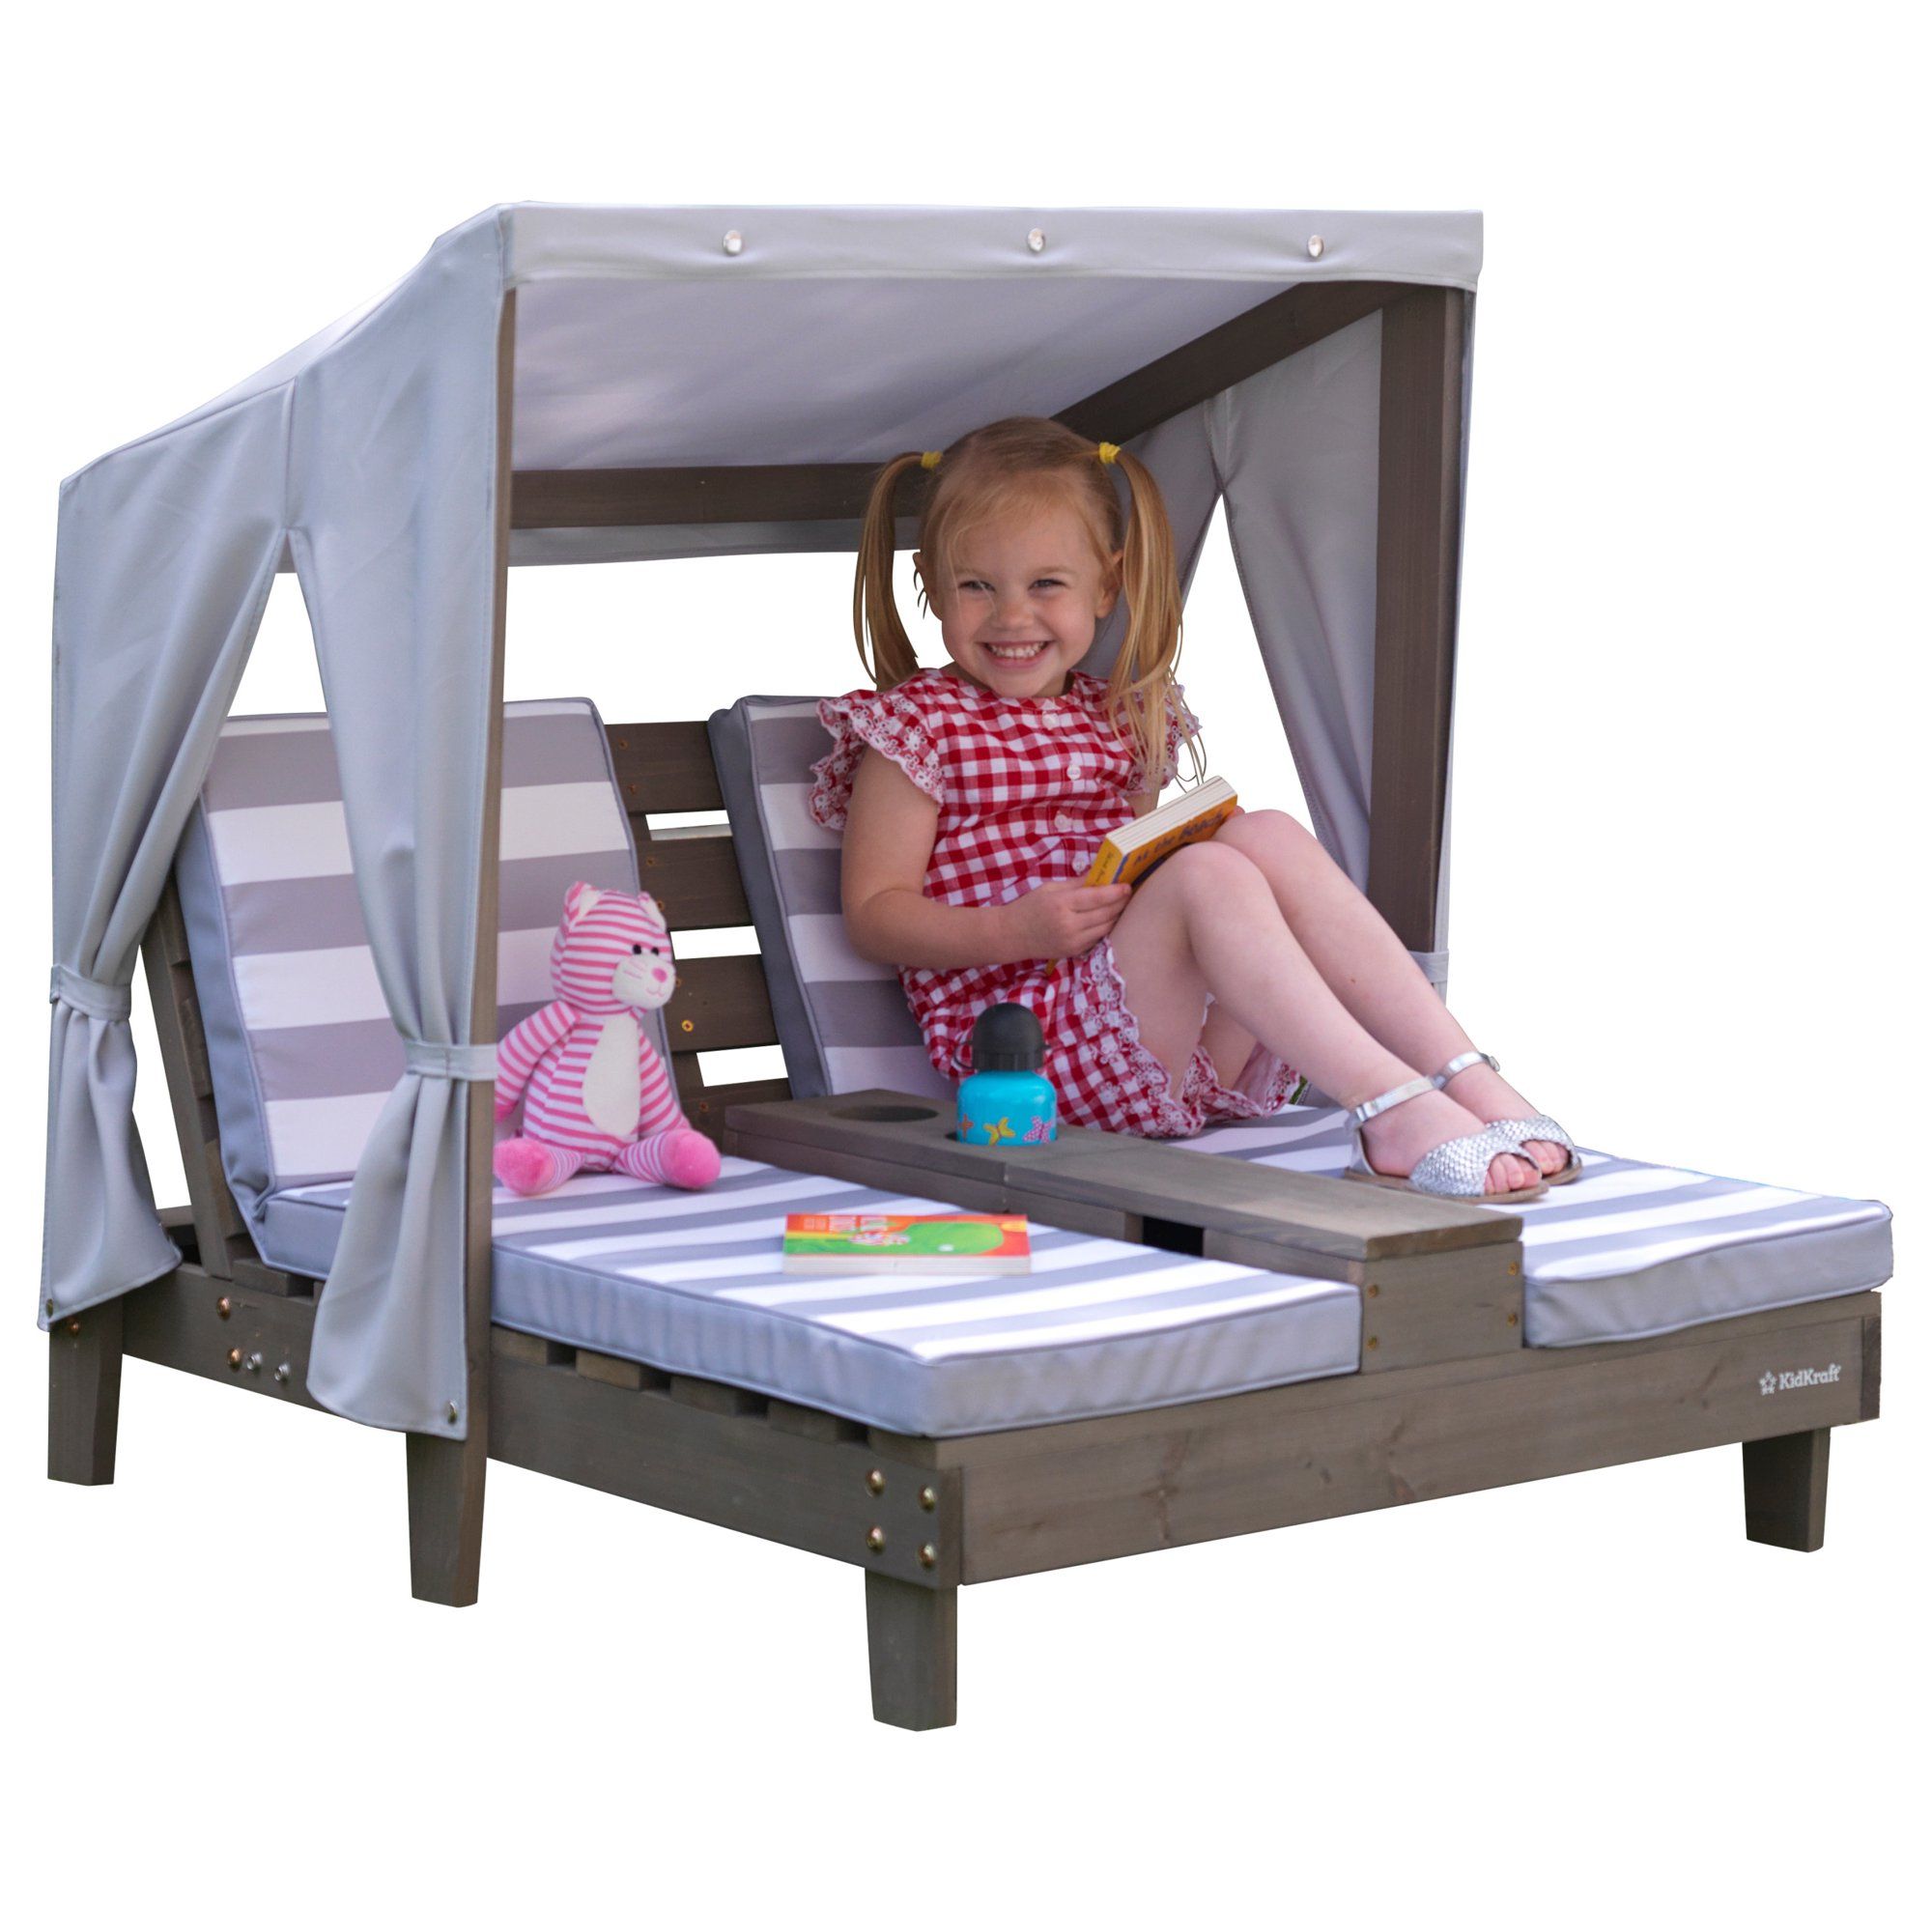 KidKraft Double Chaise Lounge with Cup Holders - Gray | Walmart (US)